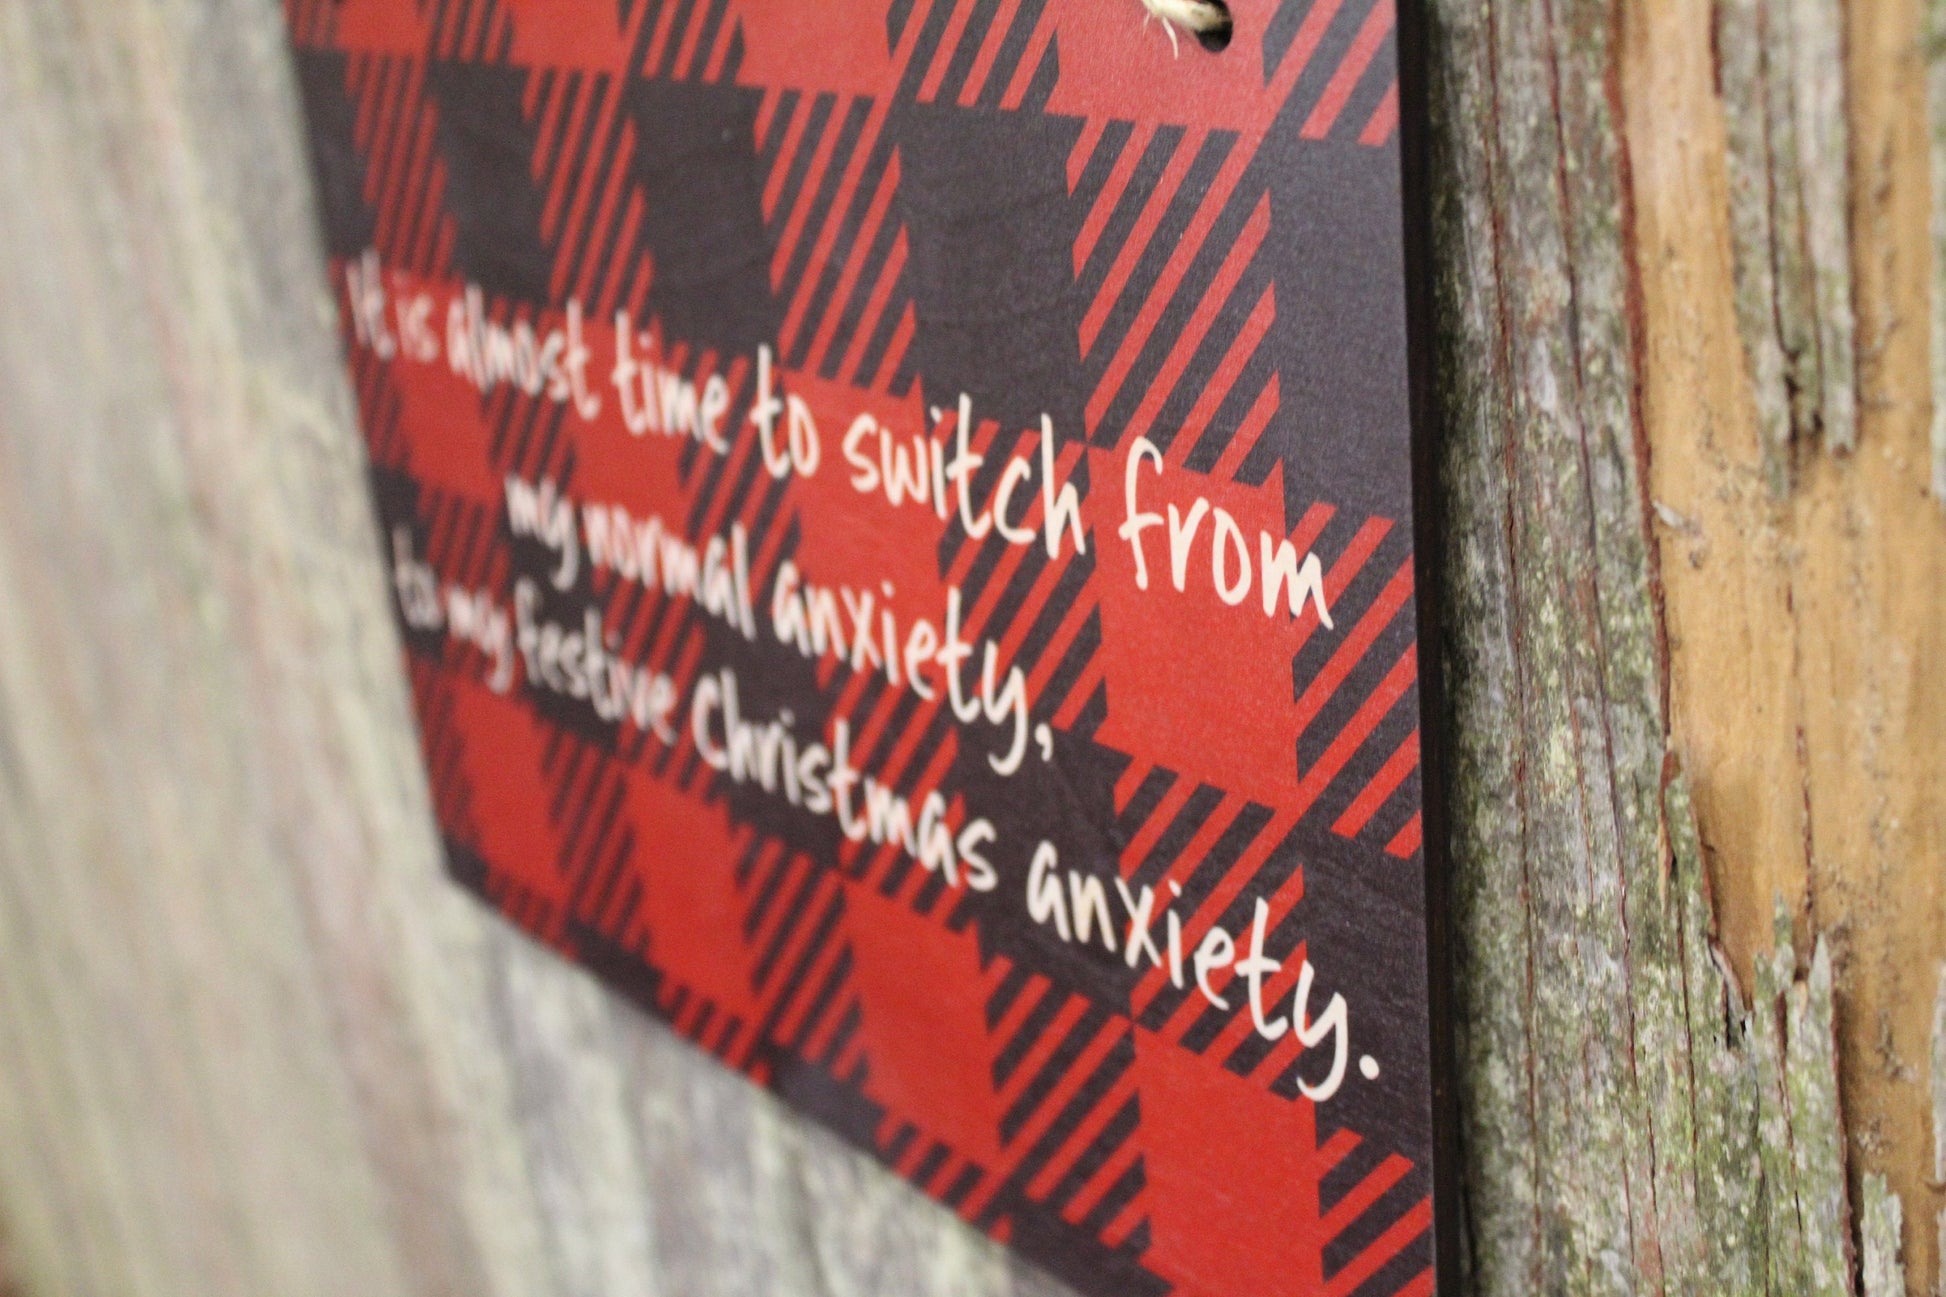 Christmas Anxiety Sign Funny Festive Hostess Gift Buffalo Plaid Rustic Wooden Wall Decor Art Plaque Wood Print